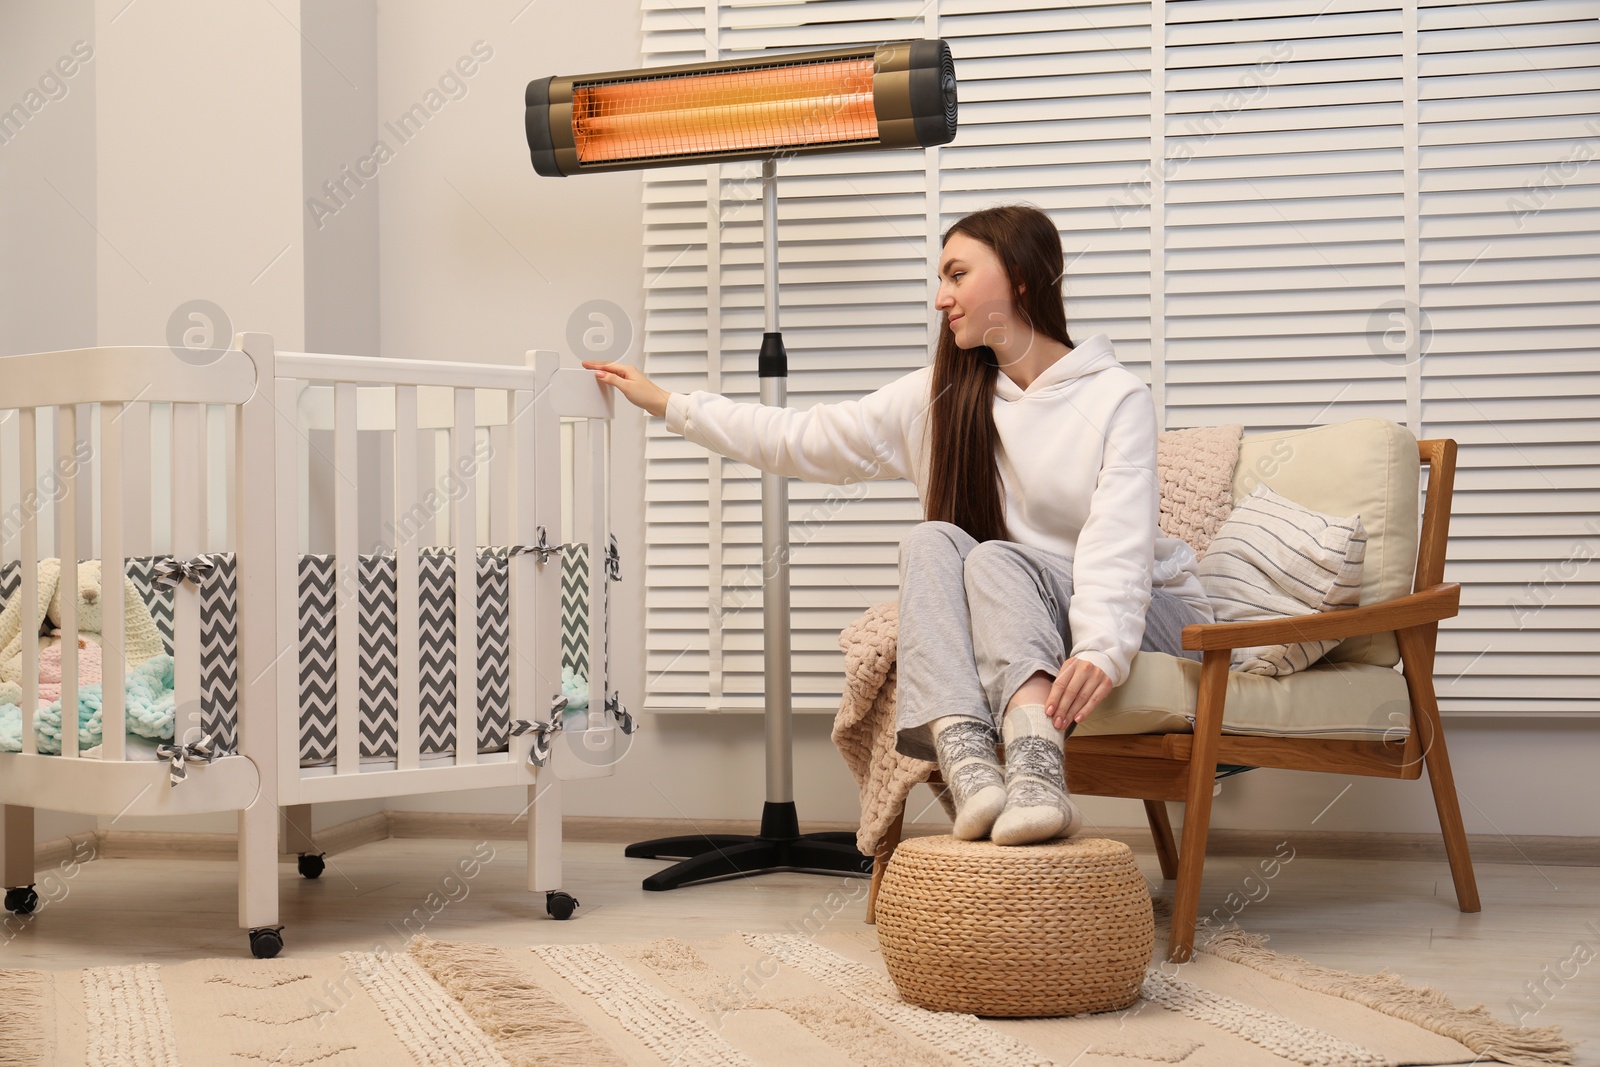 Photo of Young woman near crib and modern electric infrared heater indoors